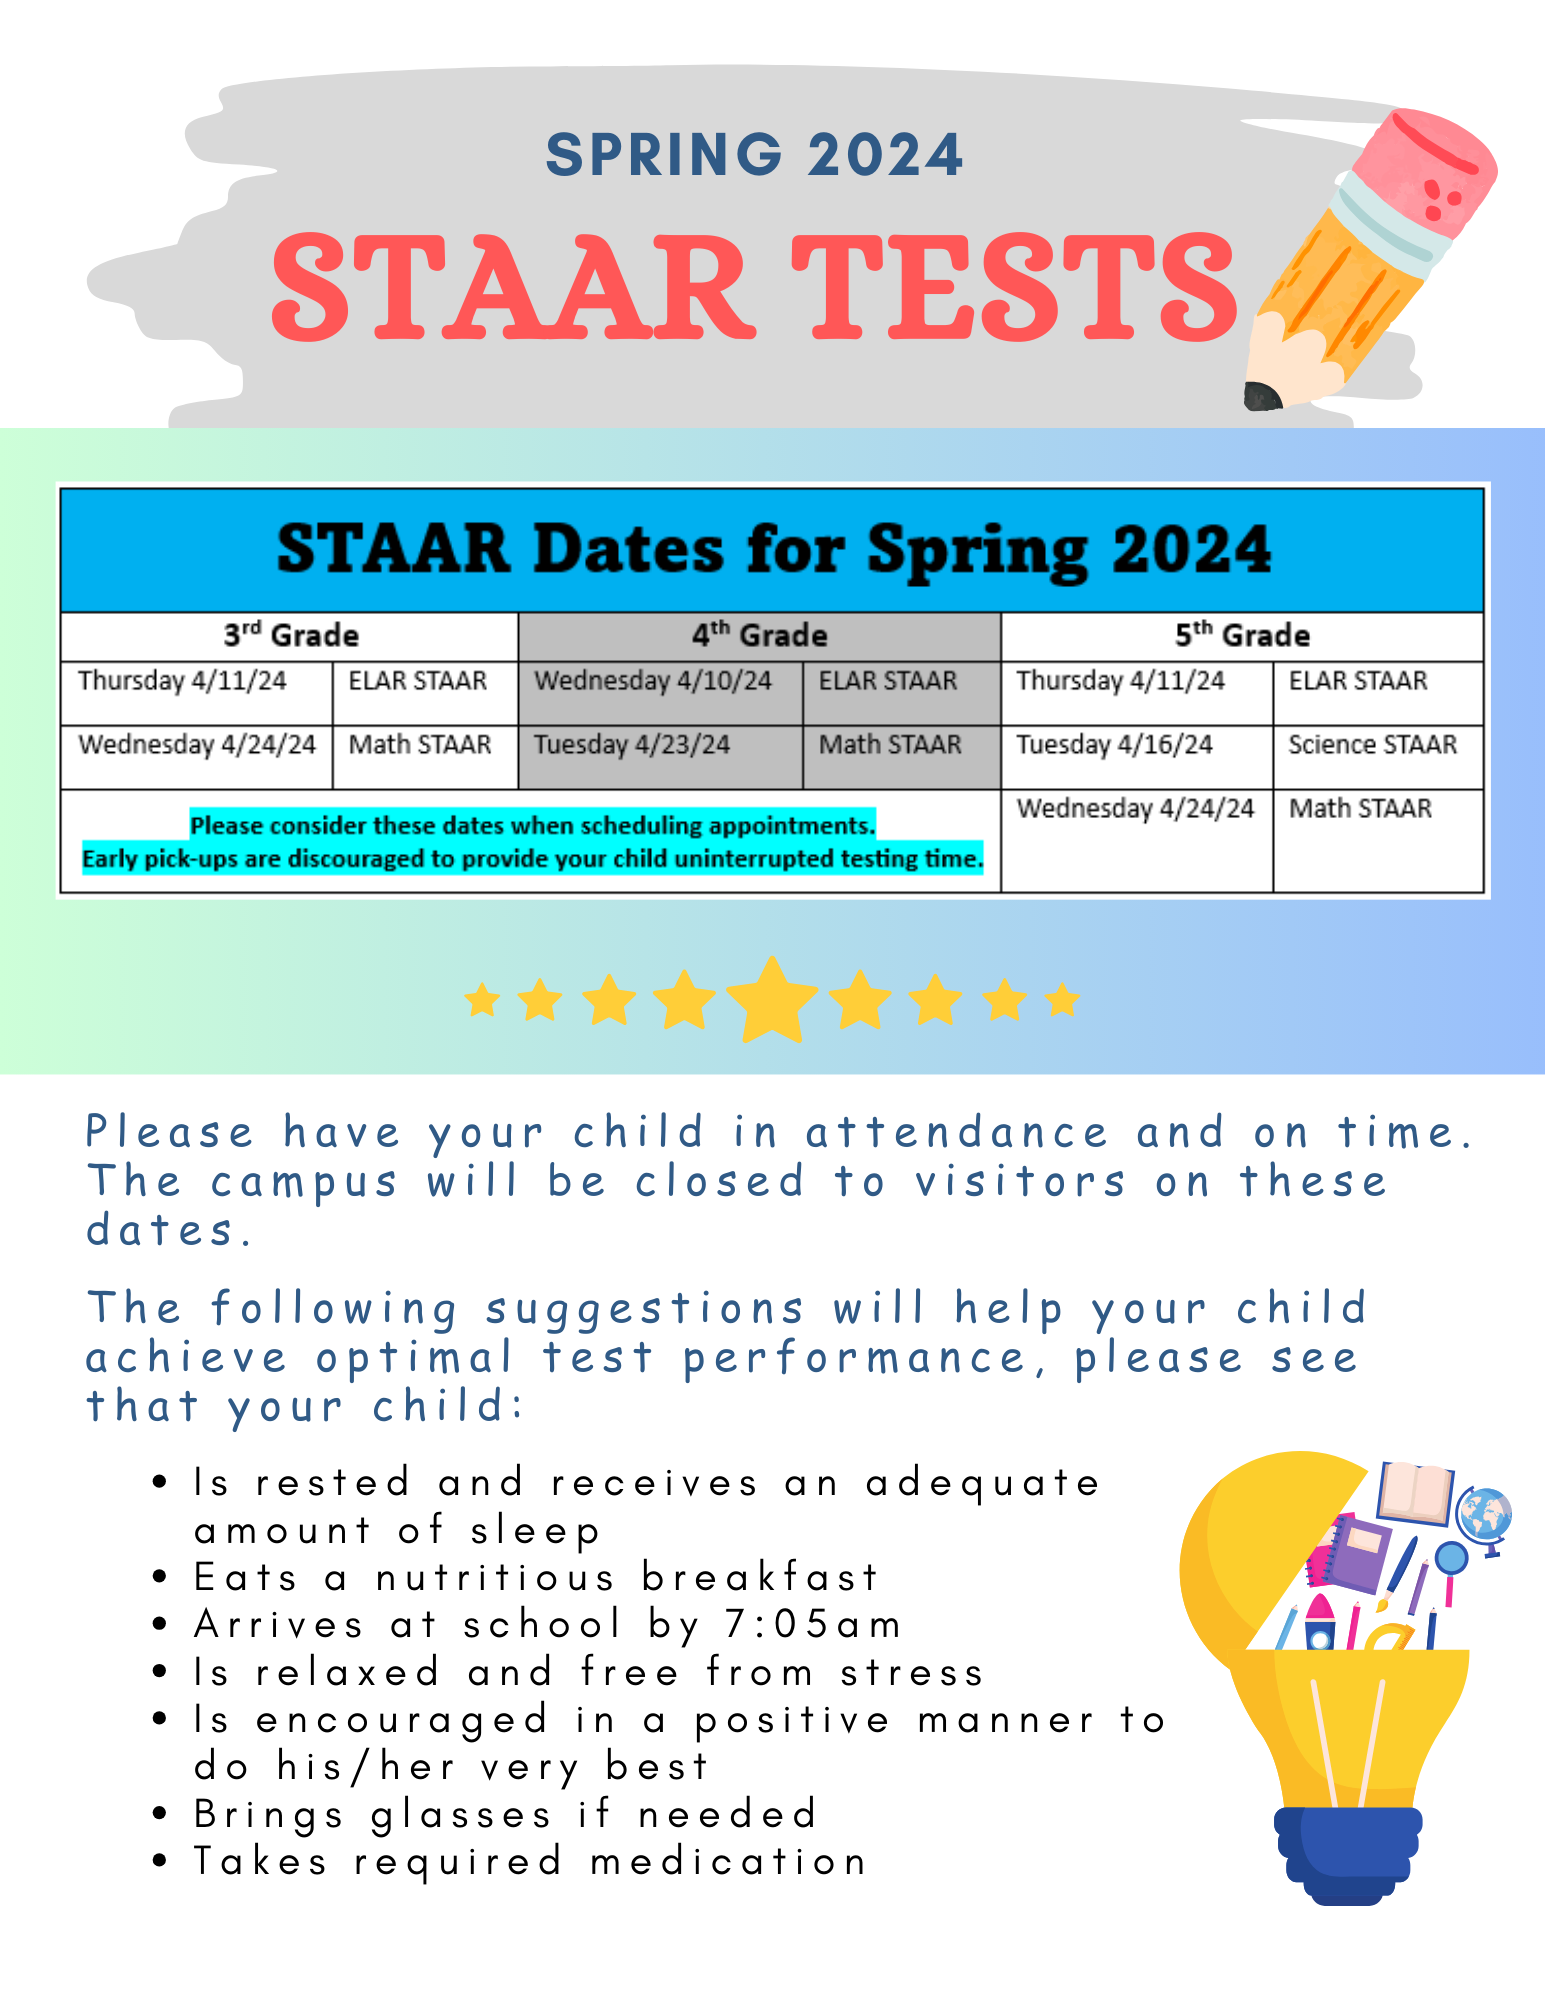 Only STAAR Dates Spring 2024